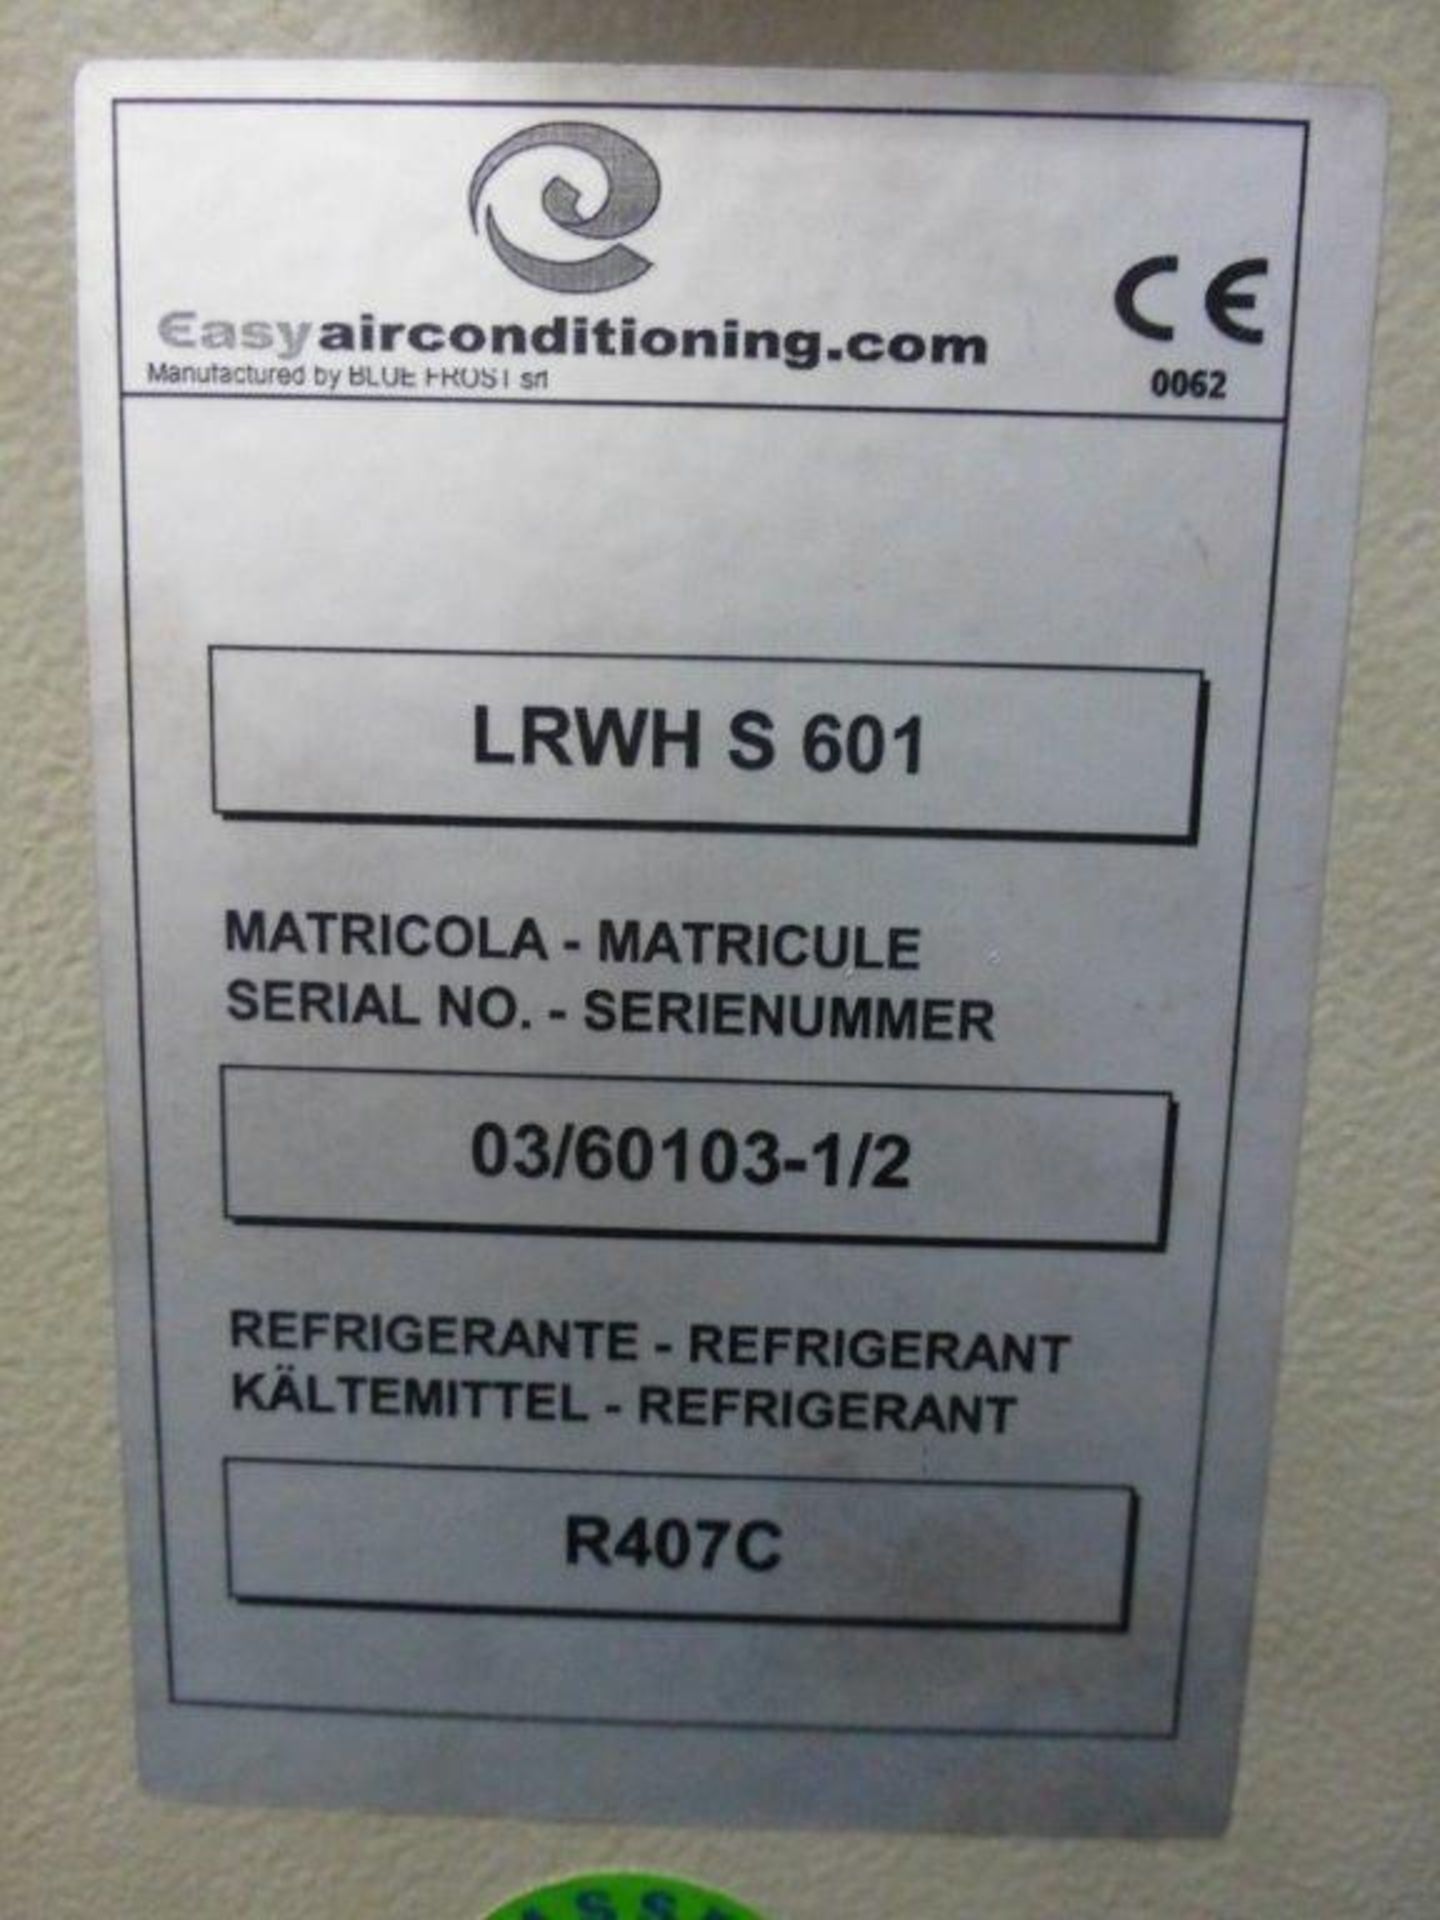 Easy Air Conditioning LRWH S 601 water chiller, serial No 03/60103-1/2, Chiller No 6, (Disconnection - Bild 3 aus 3